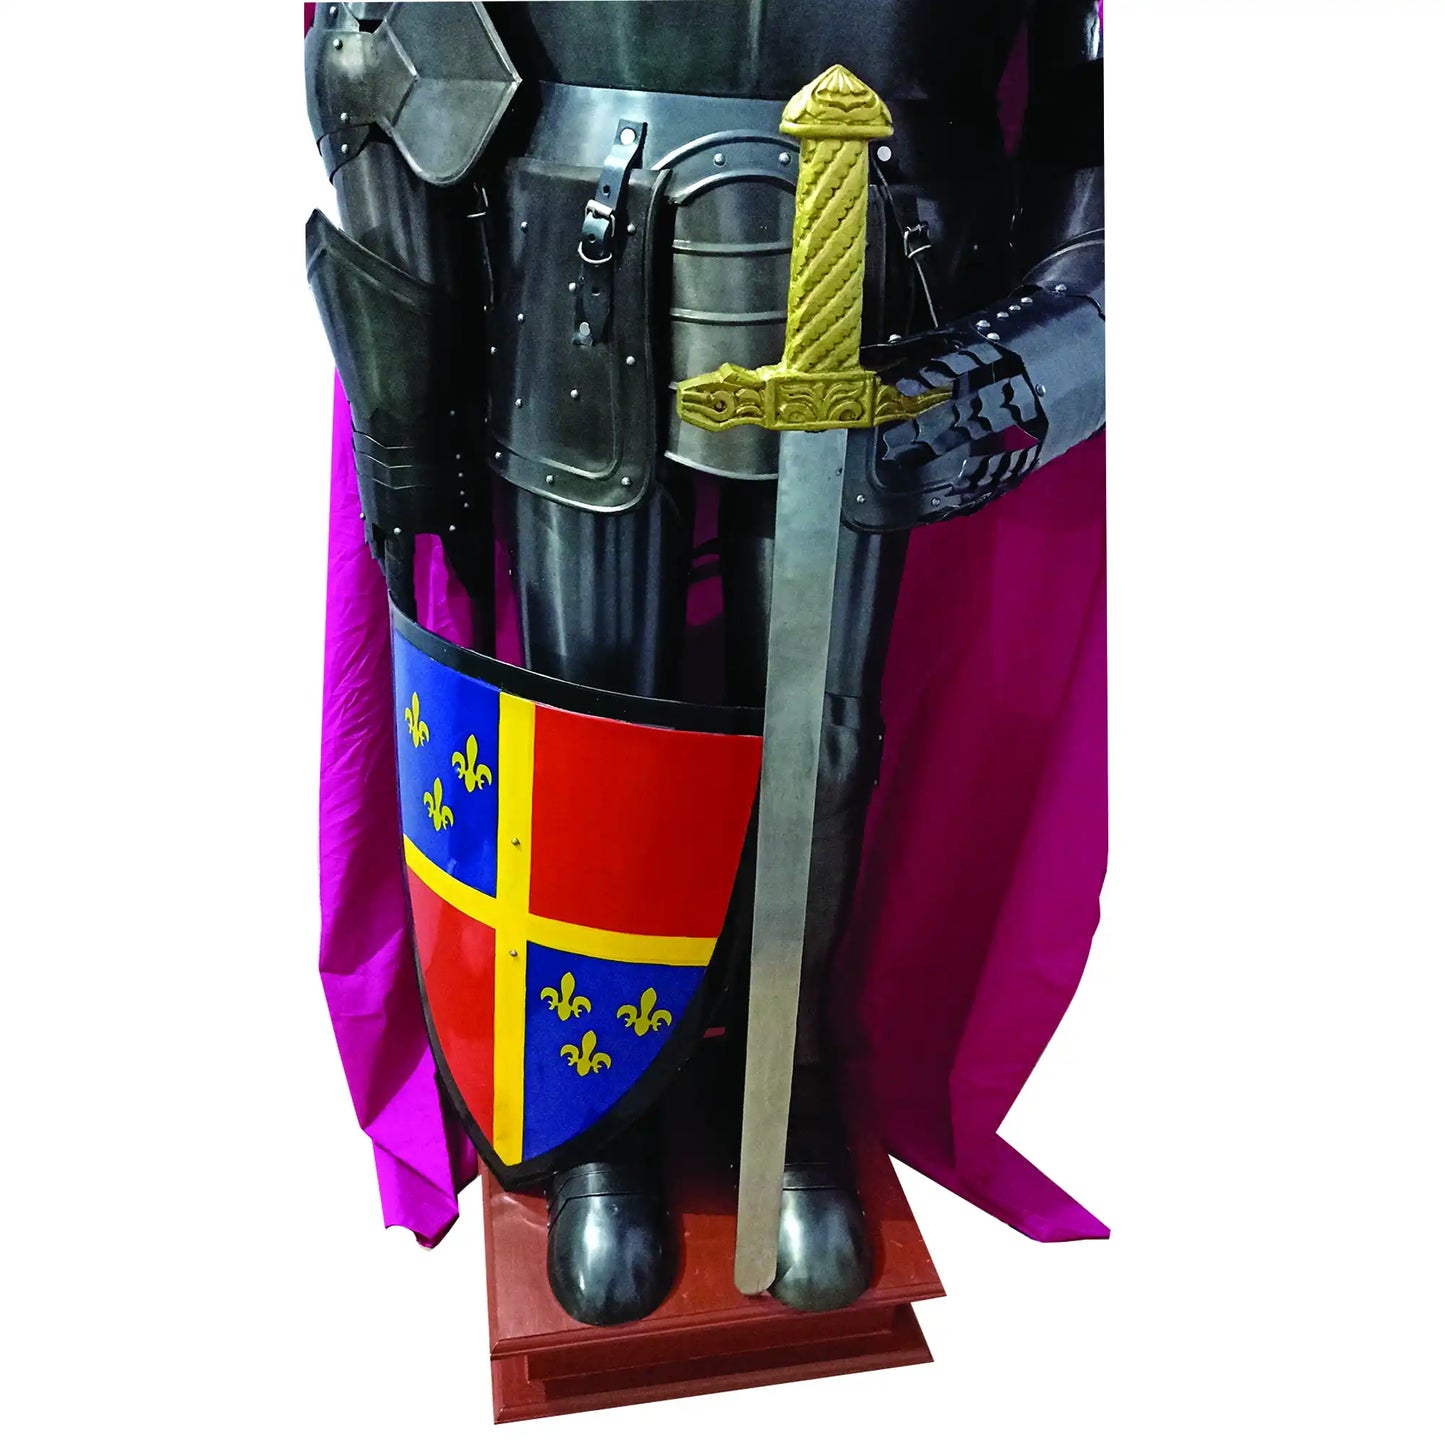 Black Knight Medieval Armor Suit with Sword Shield and Cloak